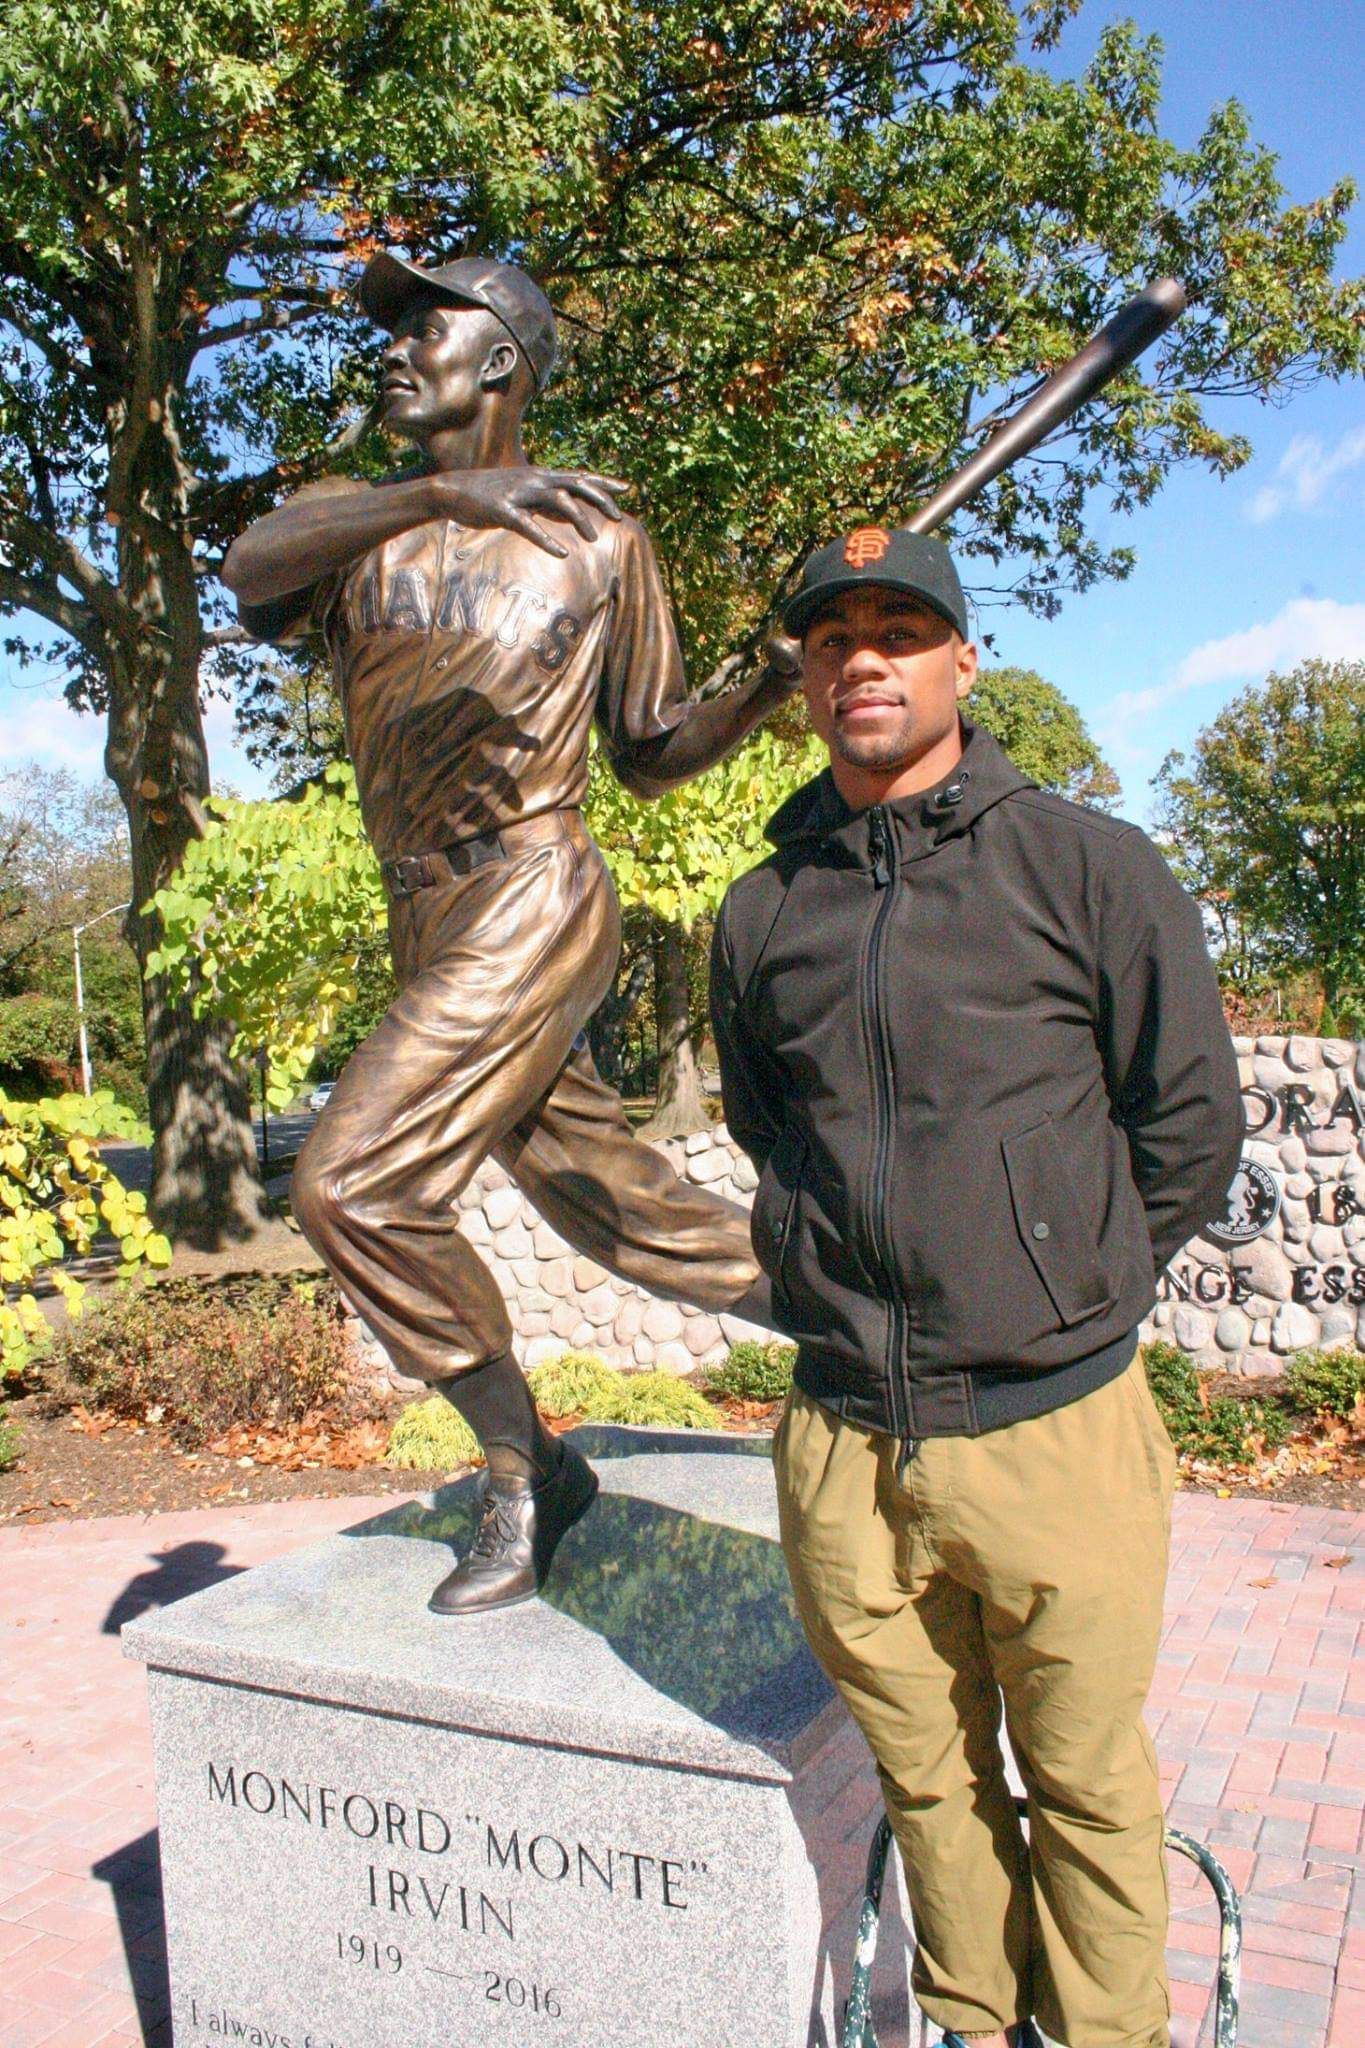 Me with statue of Cousin Monte Irvin At Monte Irvin Park in Orange, NJ. Former Newark Eagle and San Francisco/New York Giant. Irvin followed right behind Jackie Robinson to cross the color barrier line in Major League Baseball. Negro league and MLB Hall of Fame inductee.